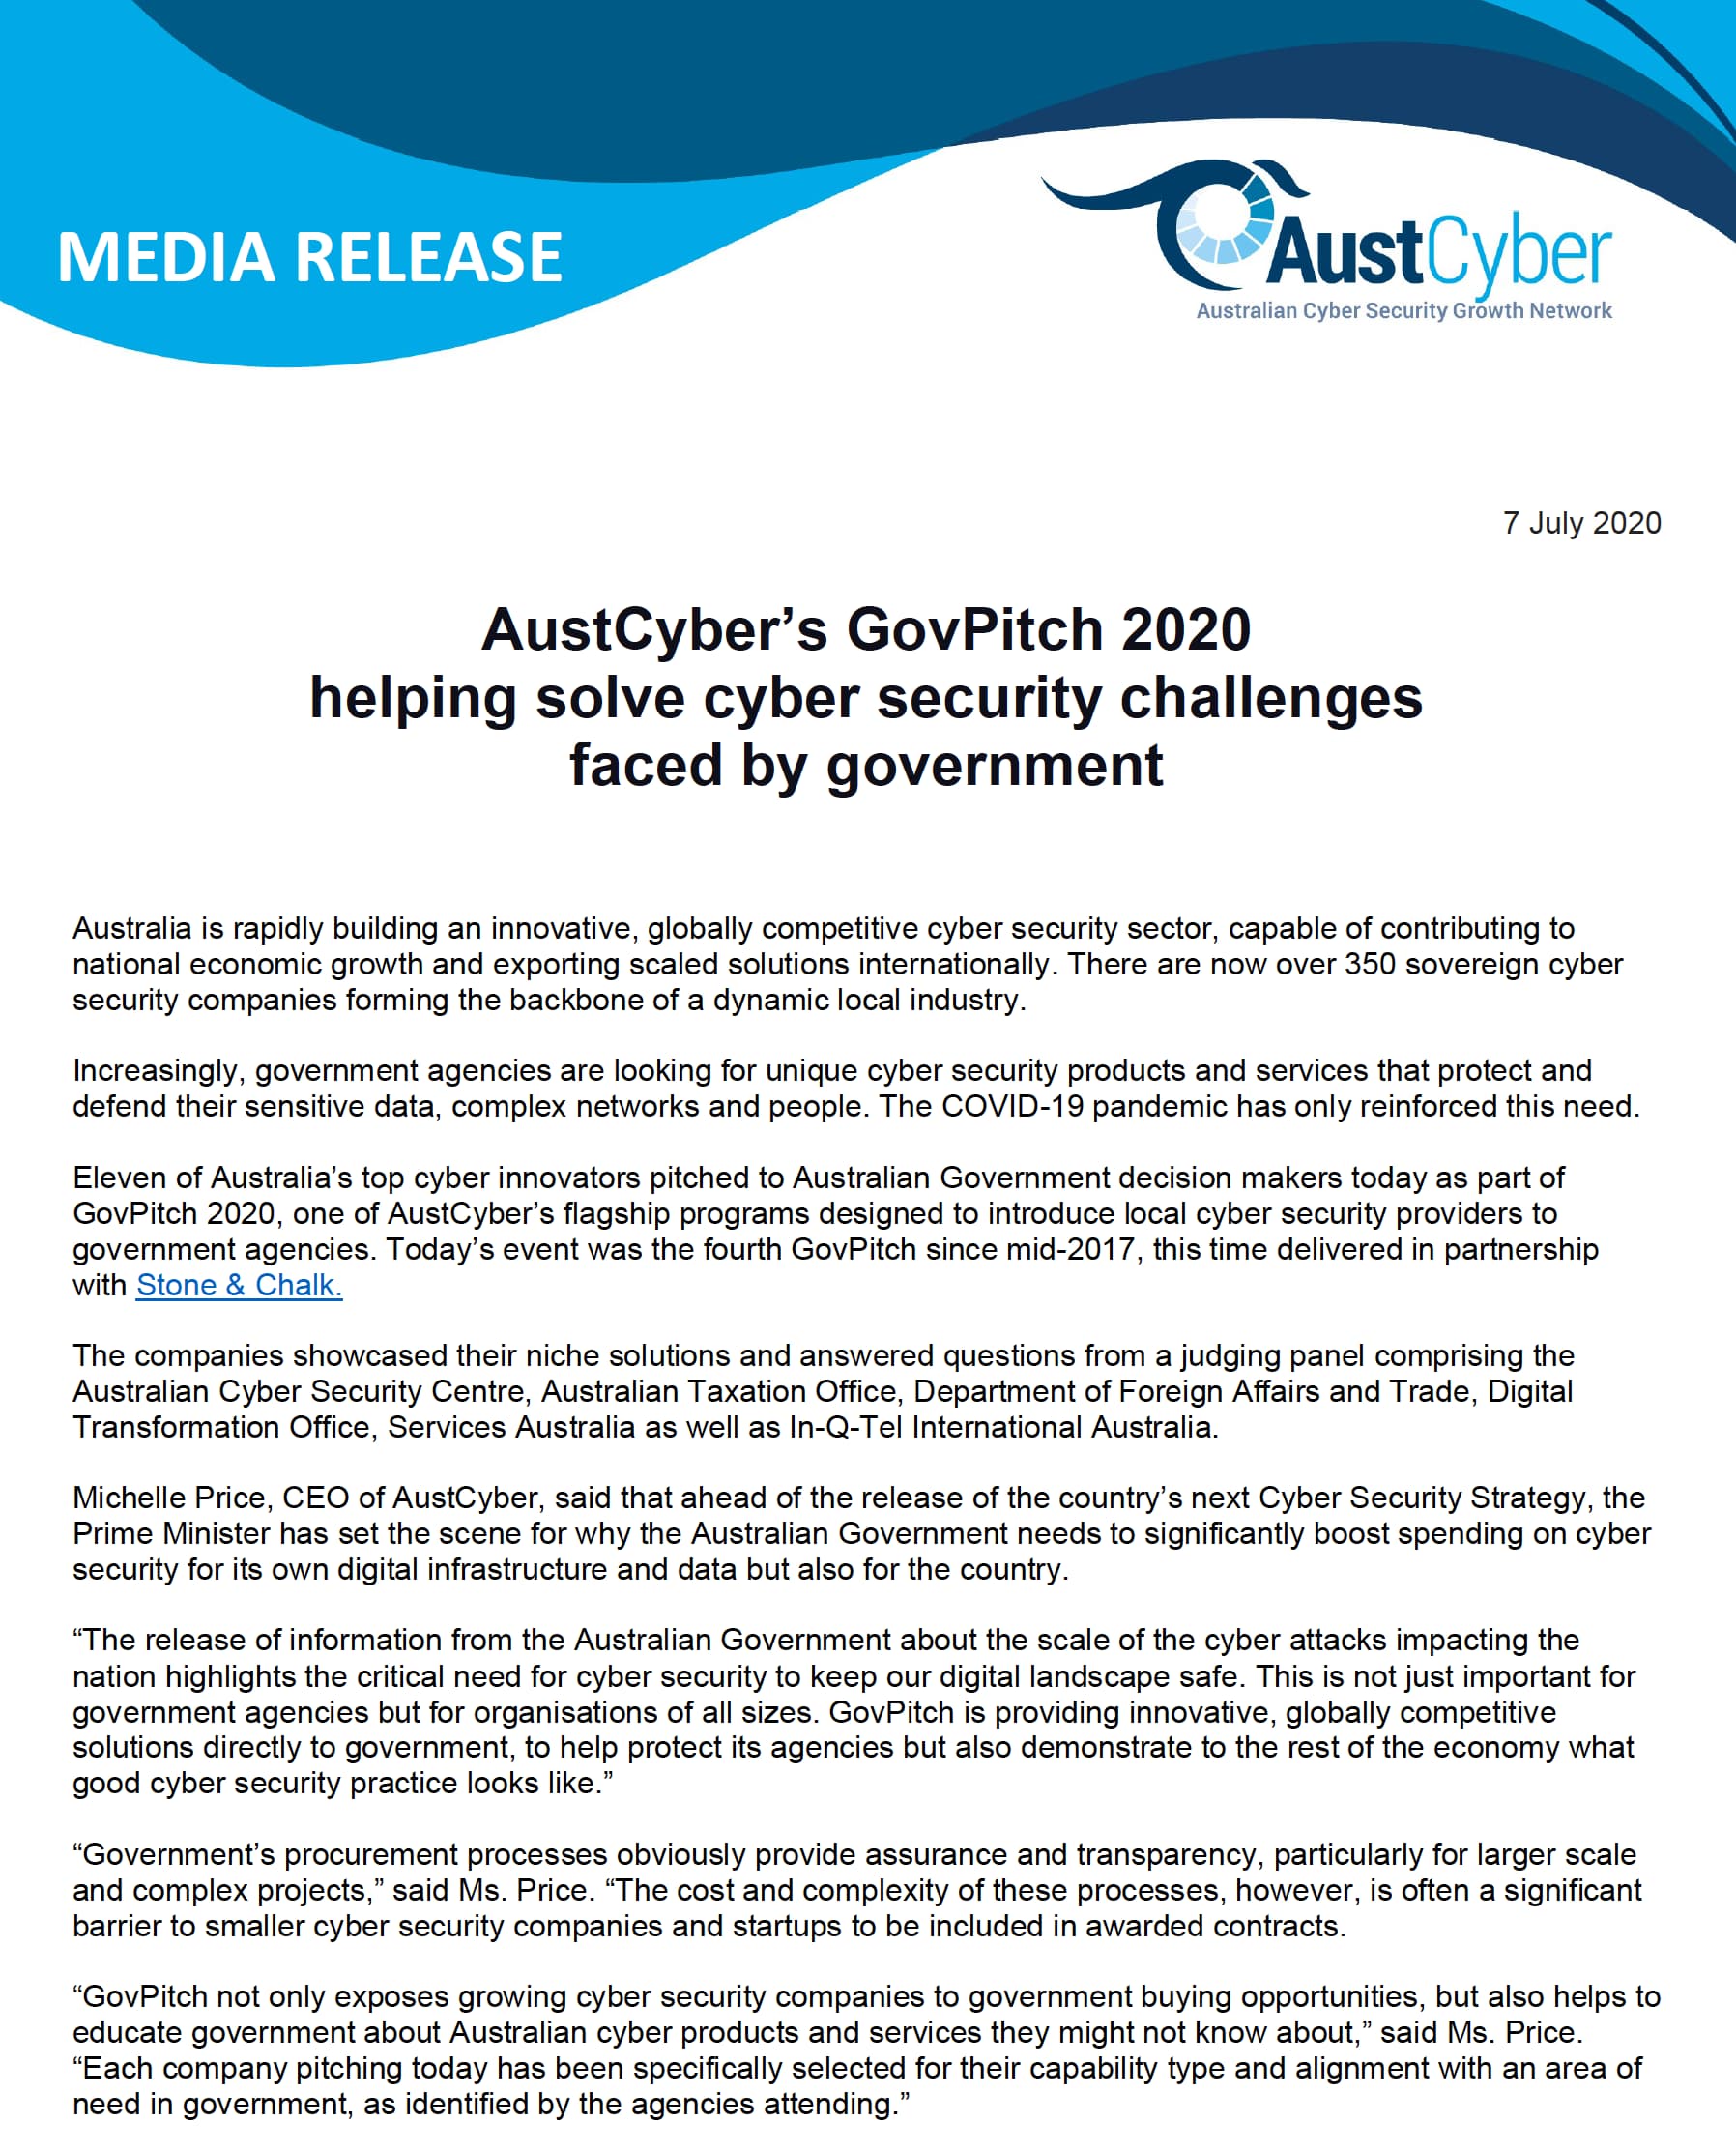 AustCyber's GovPitch 2020 helping solve cyber security challenges faced by government